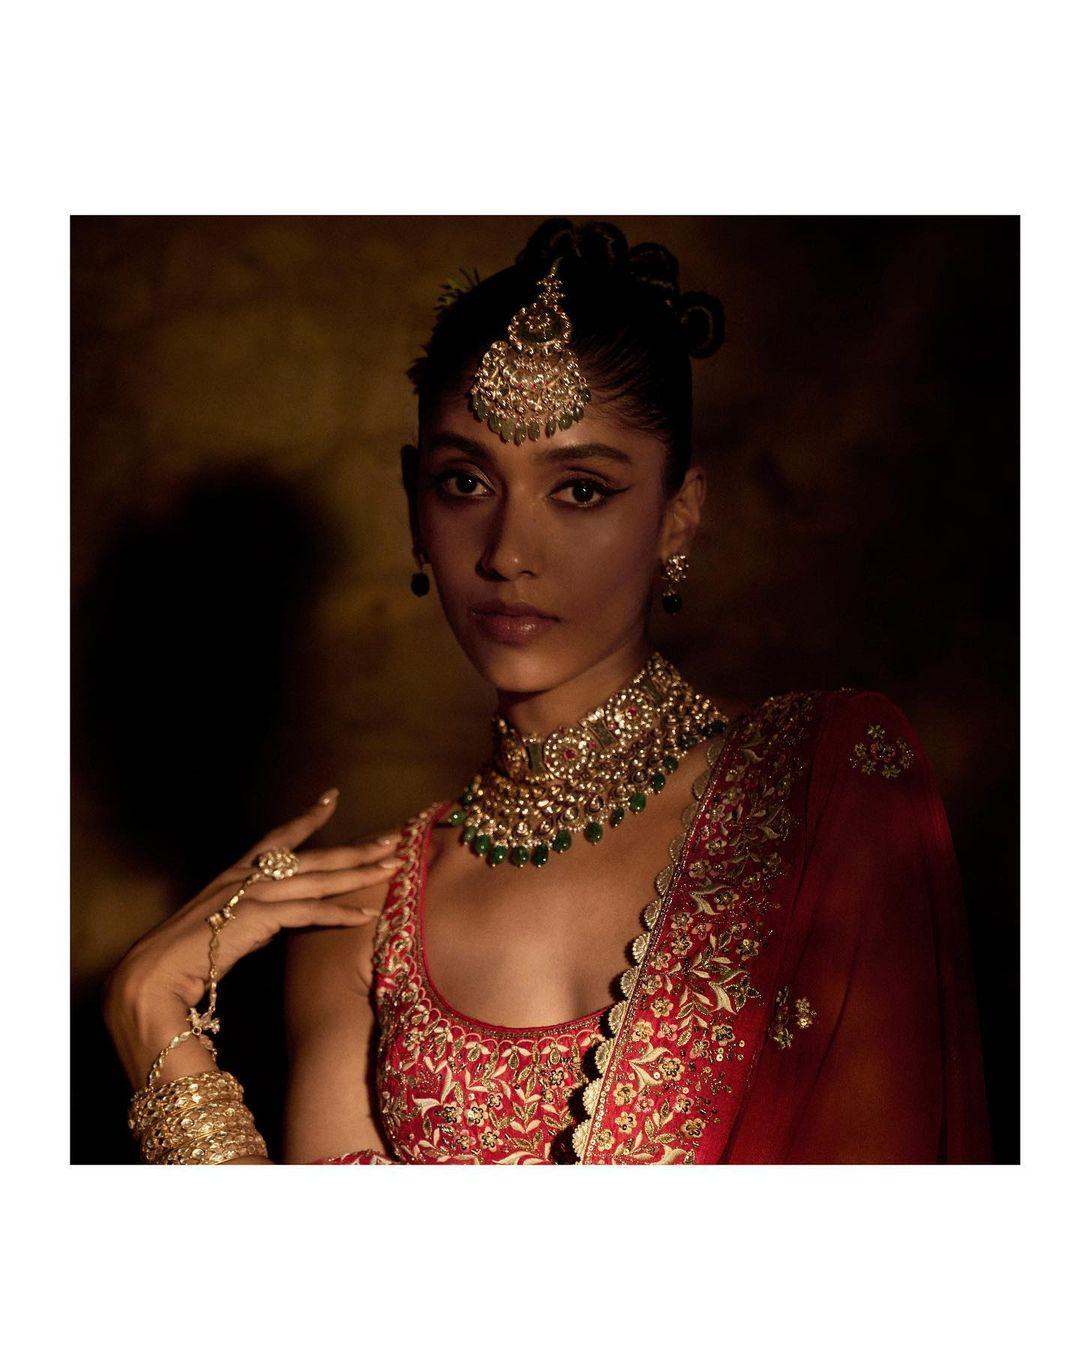 class="content__text"
 Traditional necklaces are loved unsurpassed. Set in gold, the Kairvi choker necklace pairs beautifully with the Kanaka necklace, highlighted with Emerald beads. These pieces deserve to be in your treasure chest.

 #AnitaDongrePinkCity #AnitaDongre #FineJewelry 

WhatsApp us on +91 9999313366 to know more. 
 